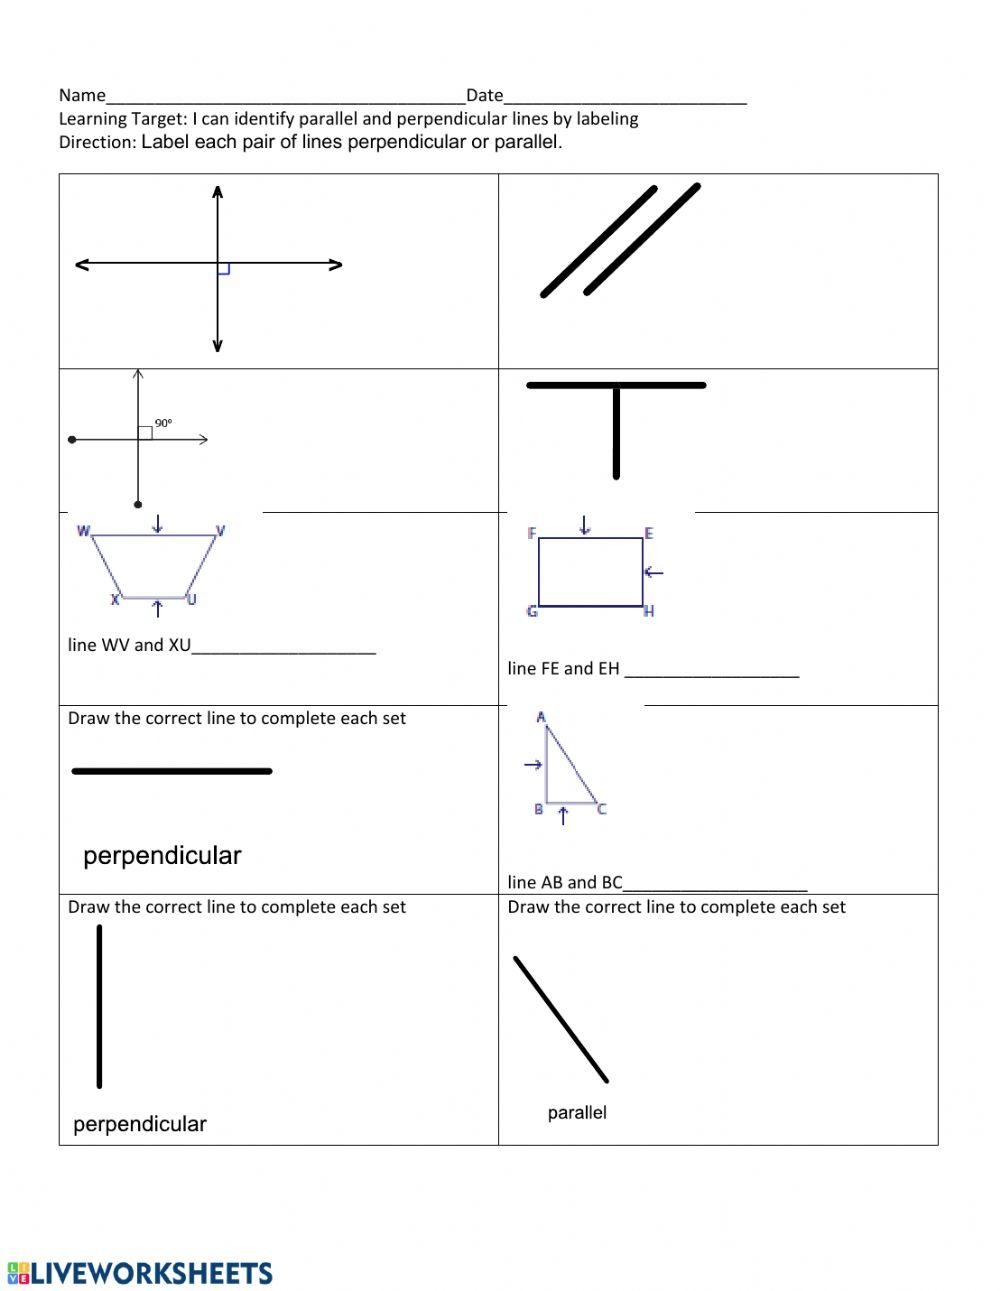 Parallel and Perpendicular lines